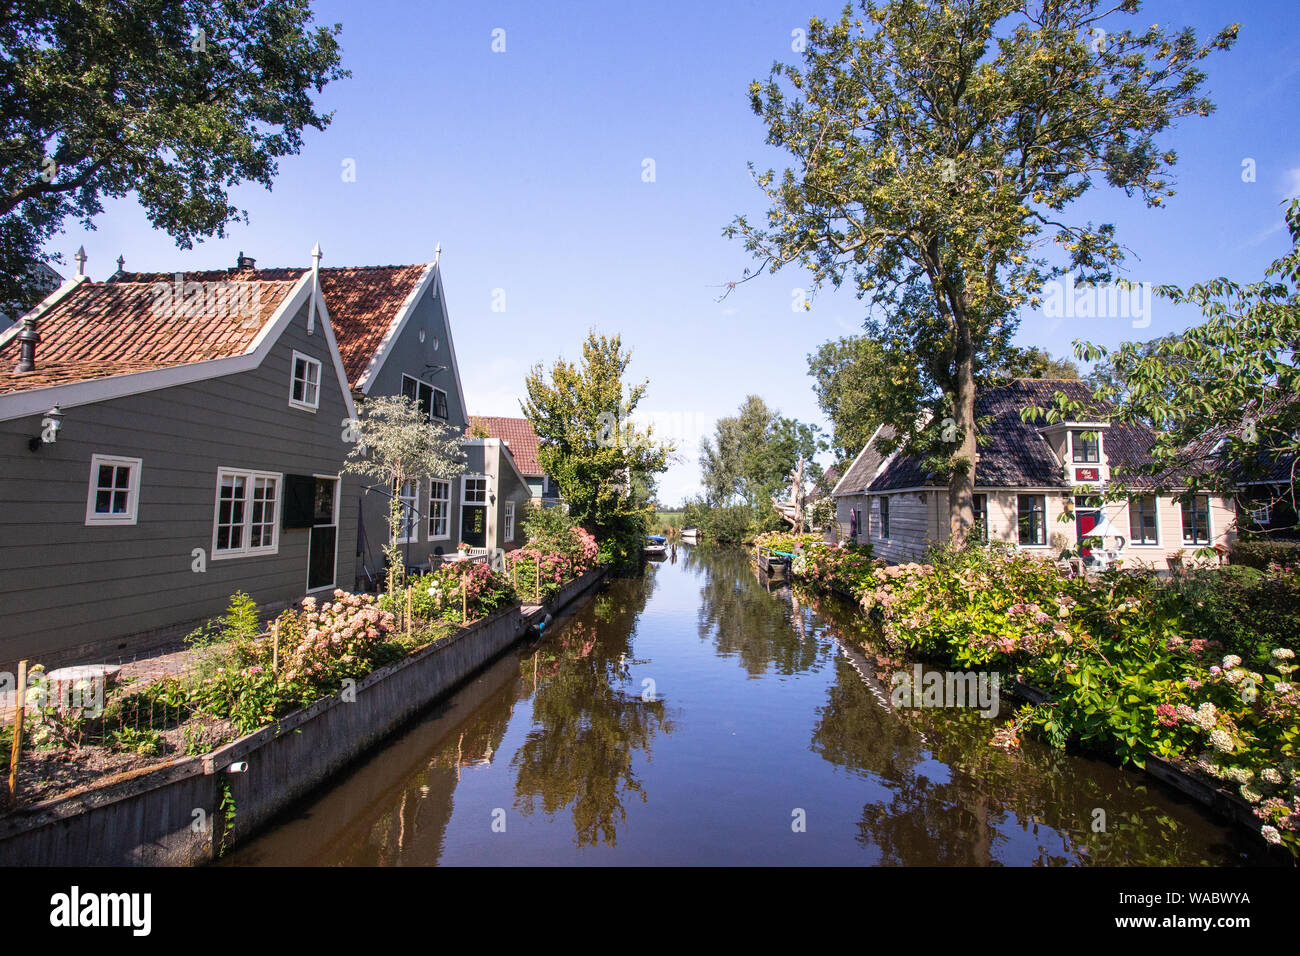 Scenic canal in the village of Broek in Waterland, North Holland, Netherlands Stock Photo